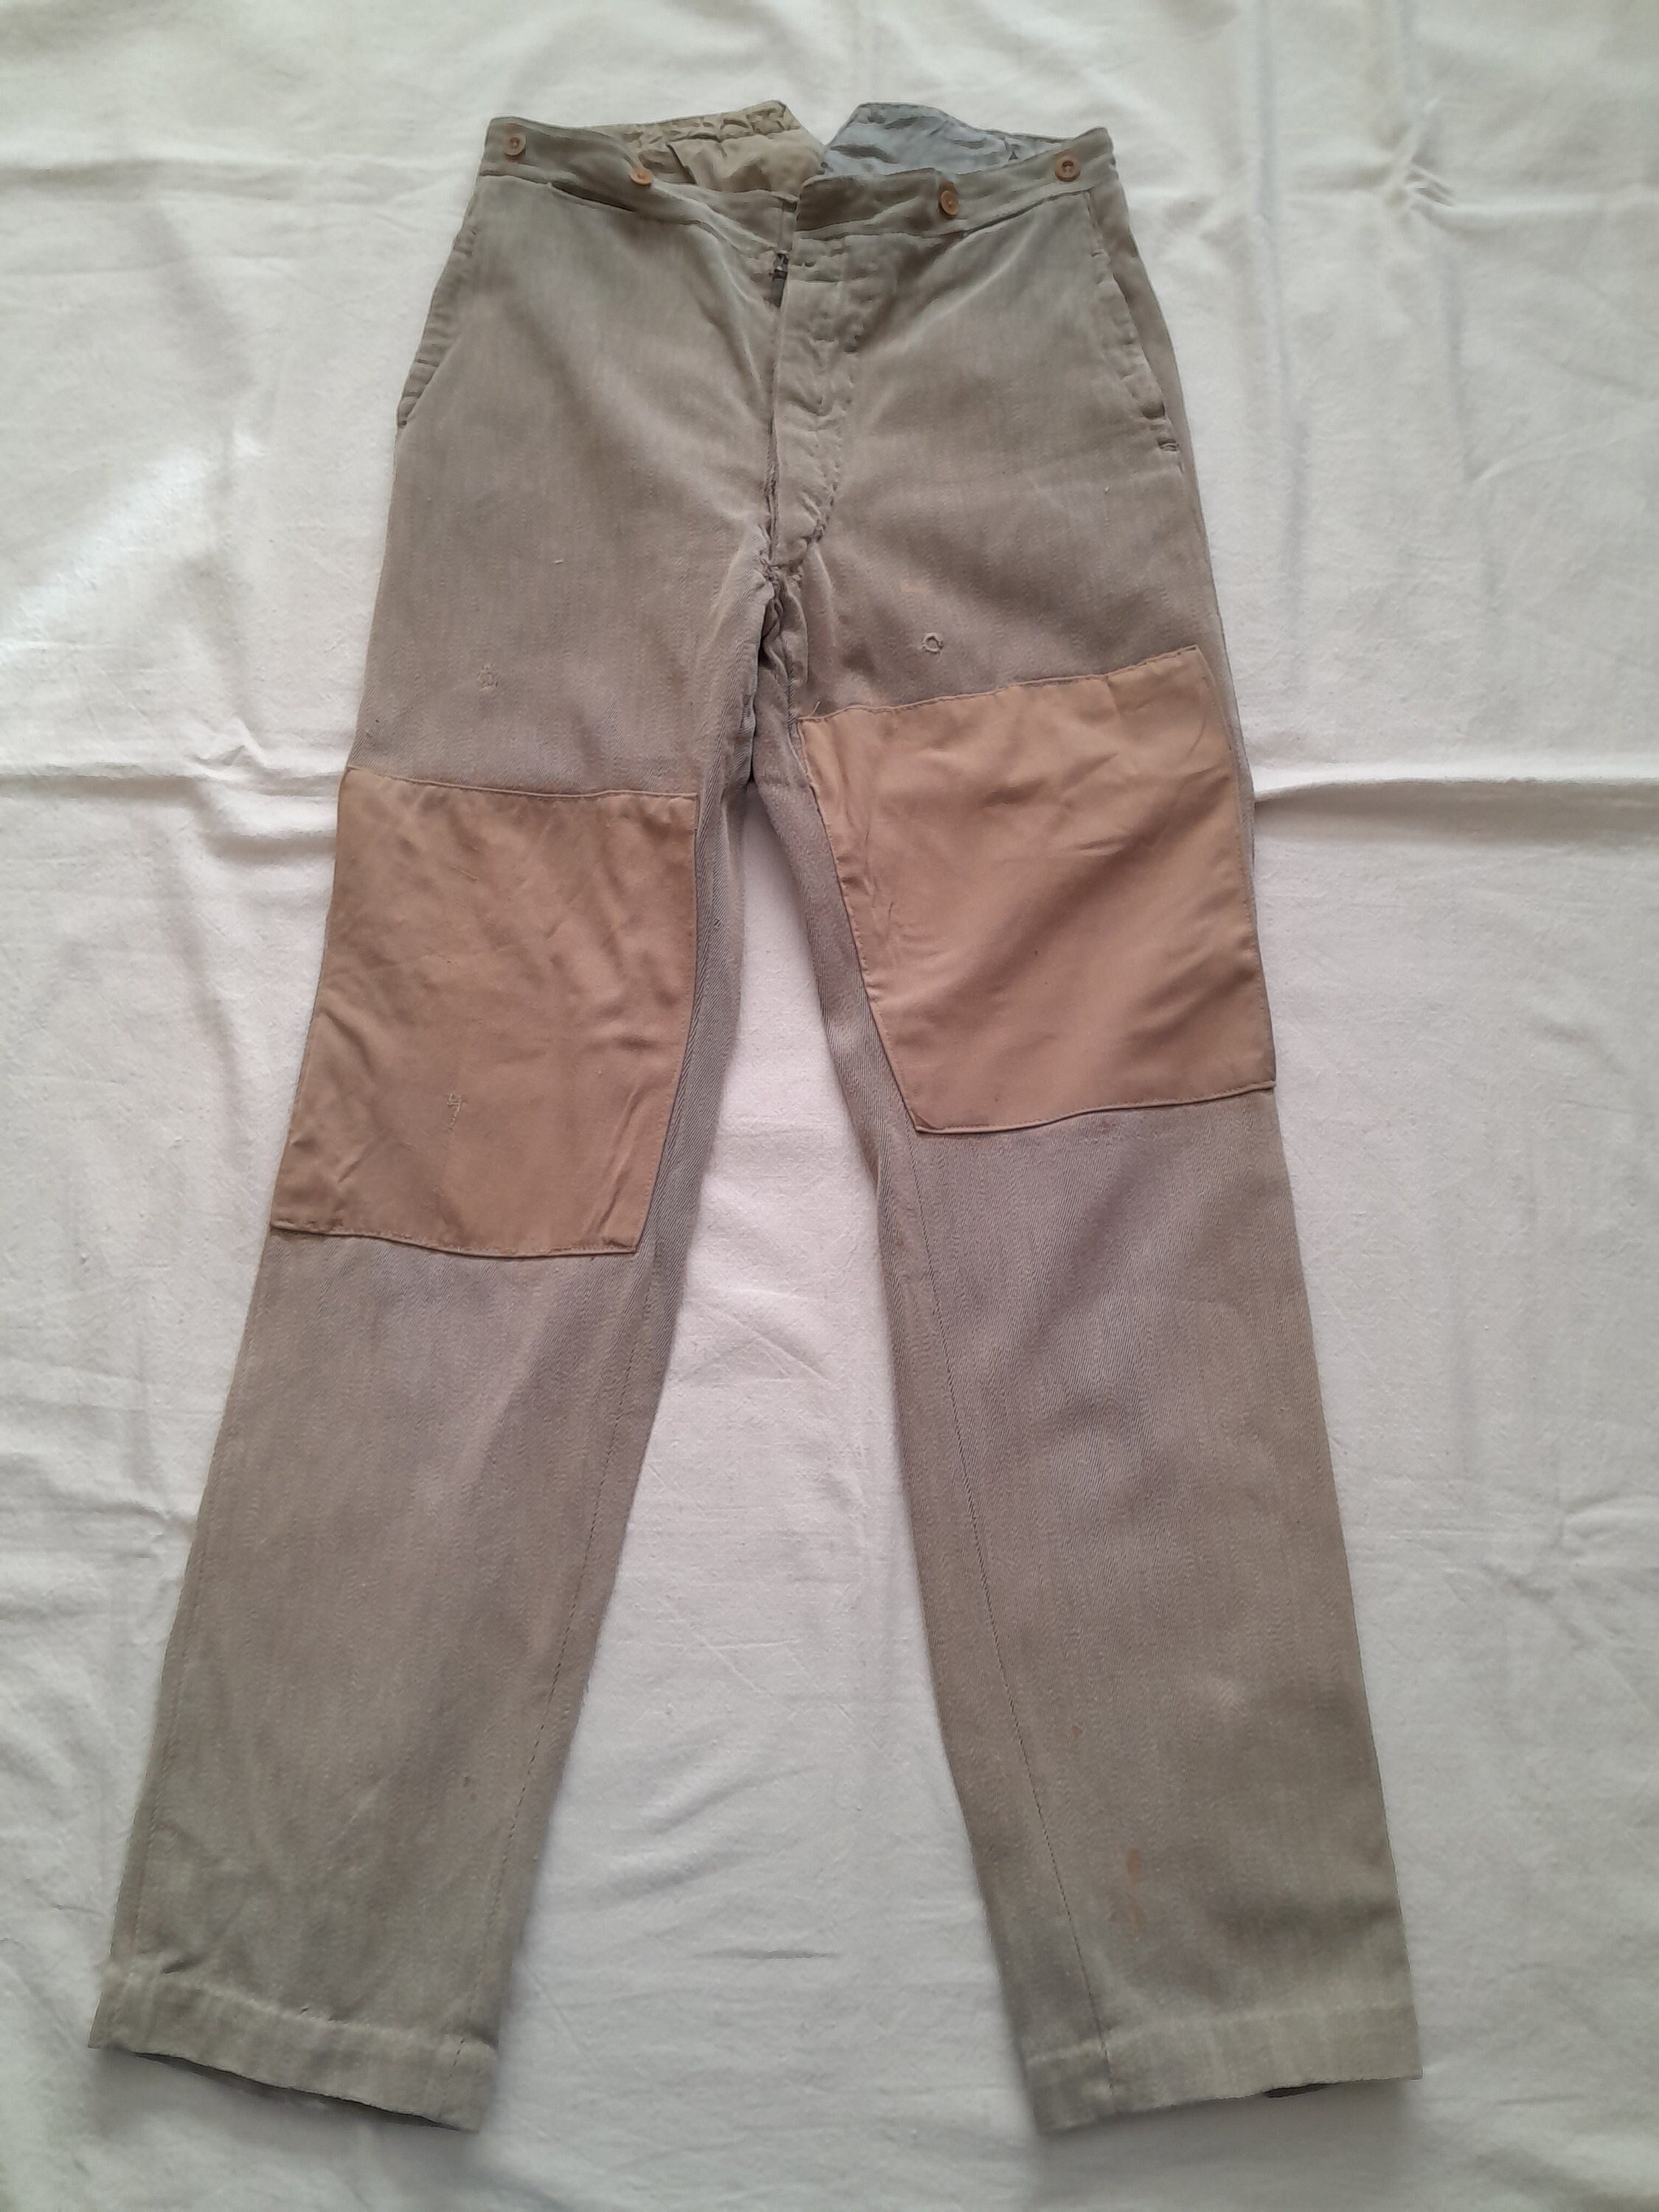 Women's Comfort Fit French Terry Pants